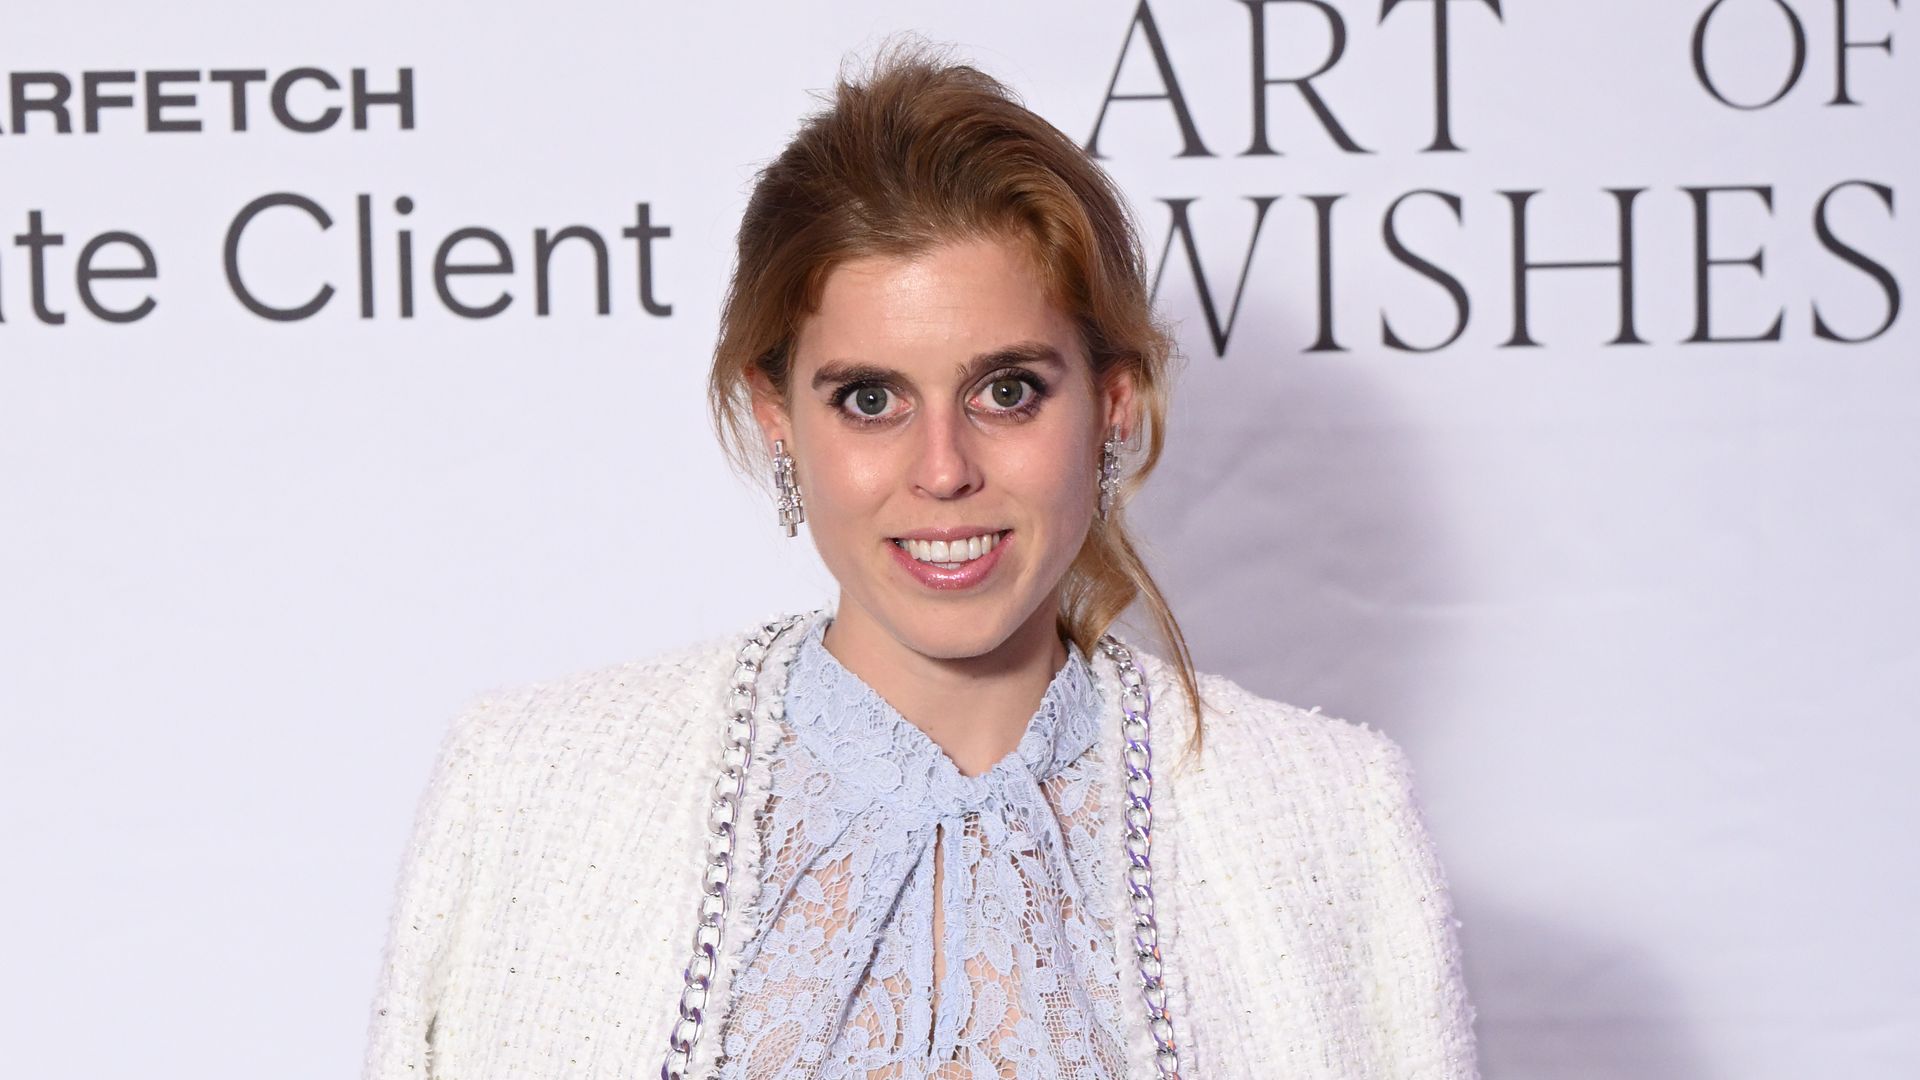 LONDON, ENGLAND - OCTOBER 09: Princess Beatrice of York attends the Art of Wishes Gala 2023 at Raffles on October 09, 2023 in London, England. (Photo by Karwai Tang/WireImage)